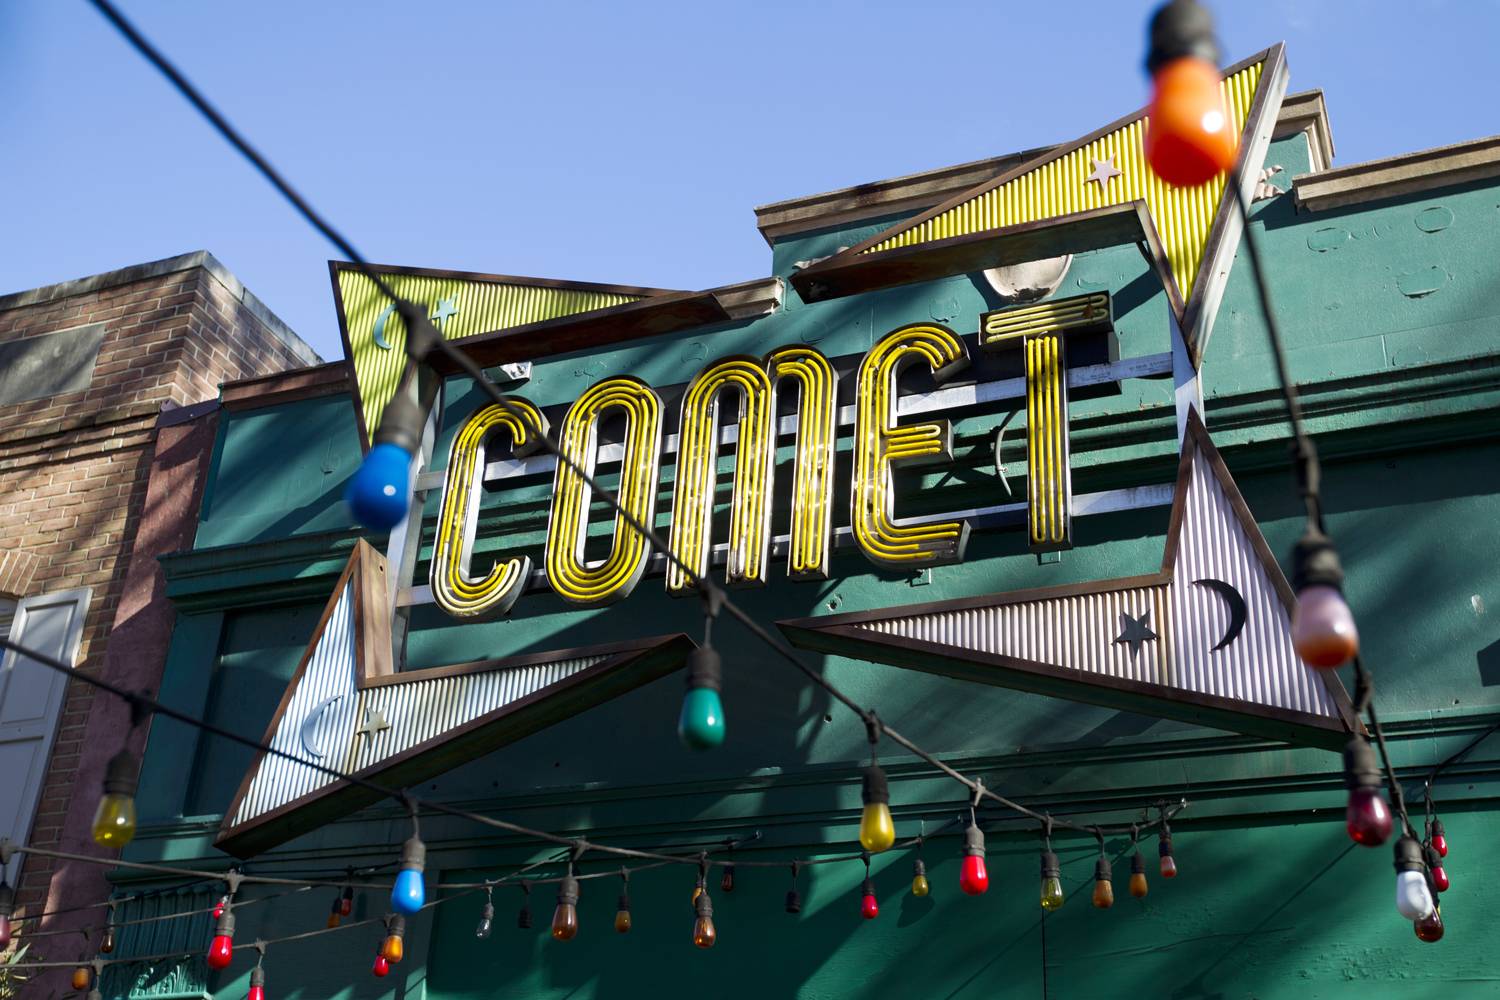 The front door of Comet Ping Pong pizza shop, in Washington, Monday, Dec. 5, 2016. A fake news story prompted a man to fire a rifle inside a popular Washington, D.C., pizza place as he attempted to &quot;self-investigate&quot; a conspiracy theory that Hillary Clinton was running a child sex ring from there, police said. (Jose Luis Magana/AP)